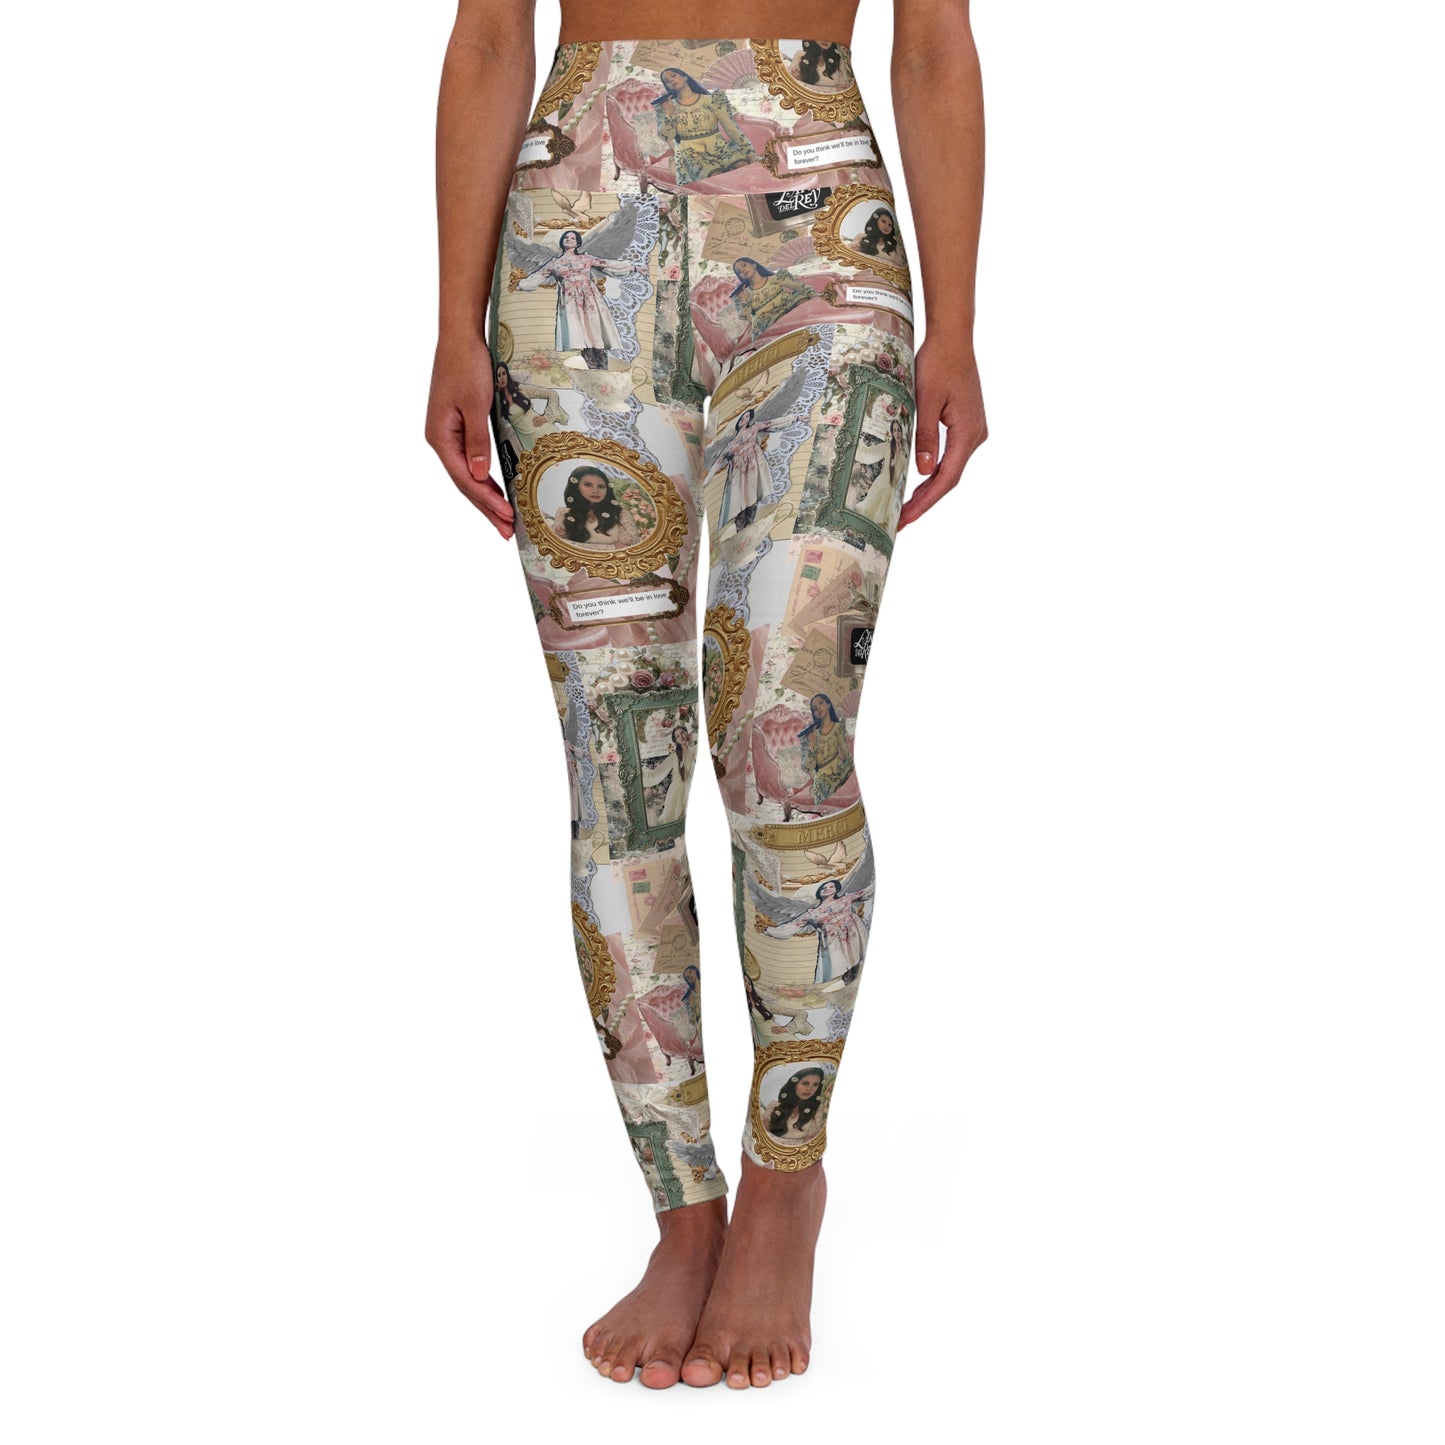 Lana Del Rey Victorian Collage High Waisted Yoga Leggings